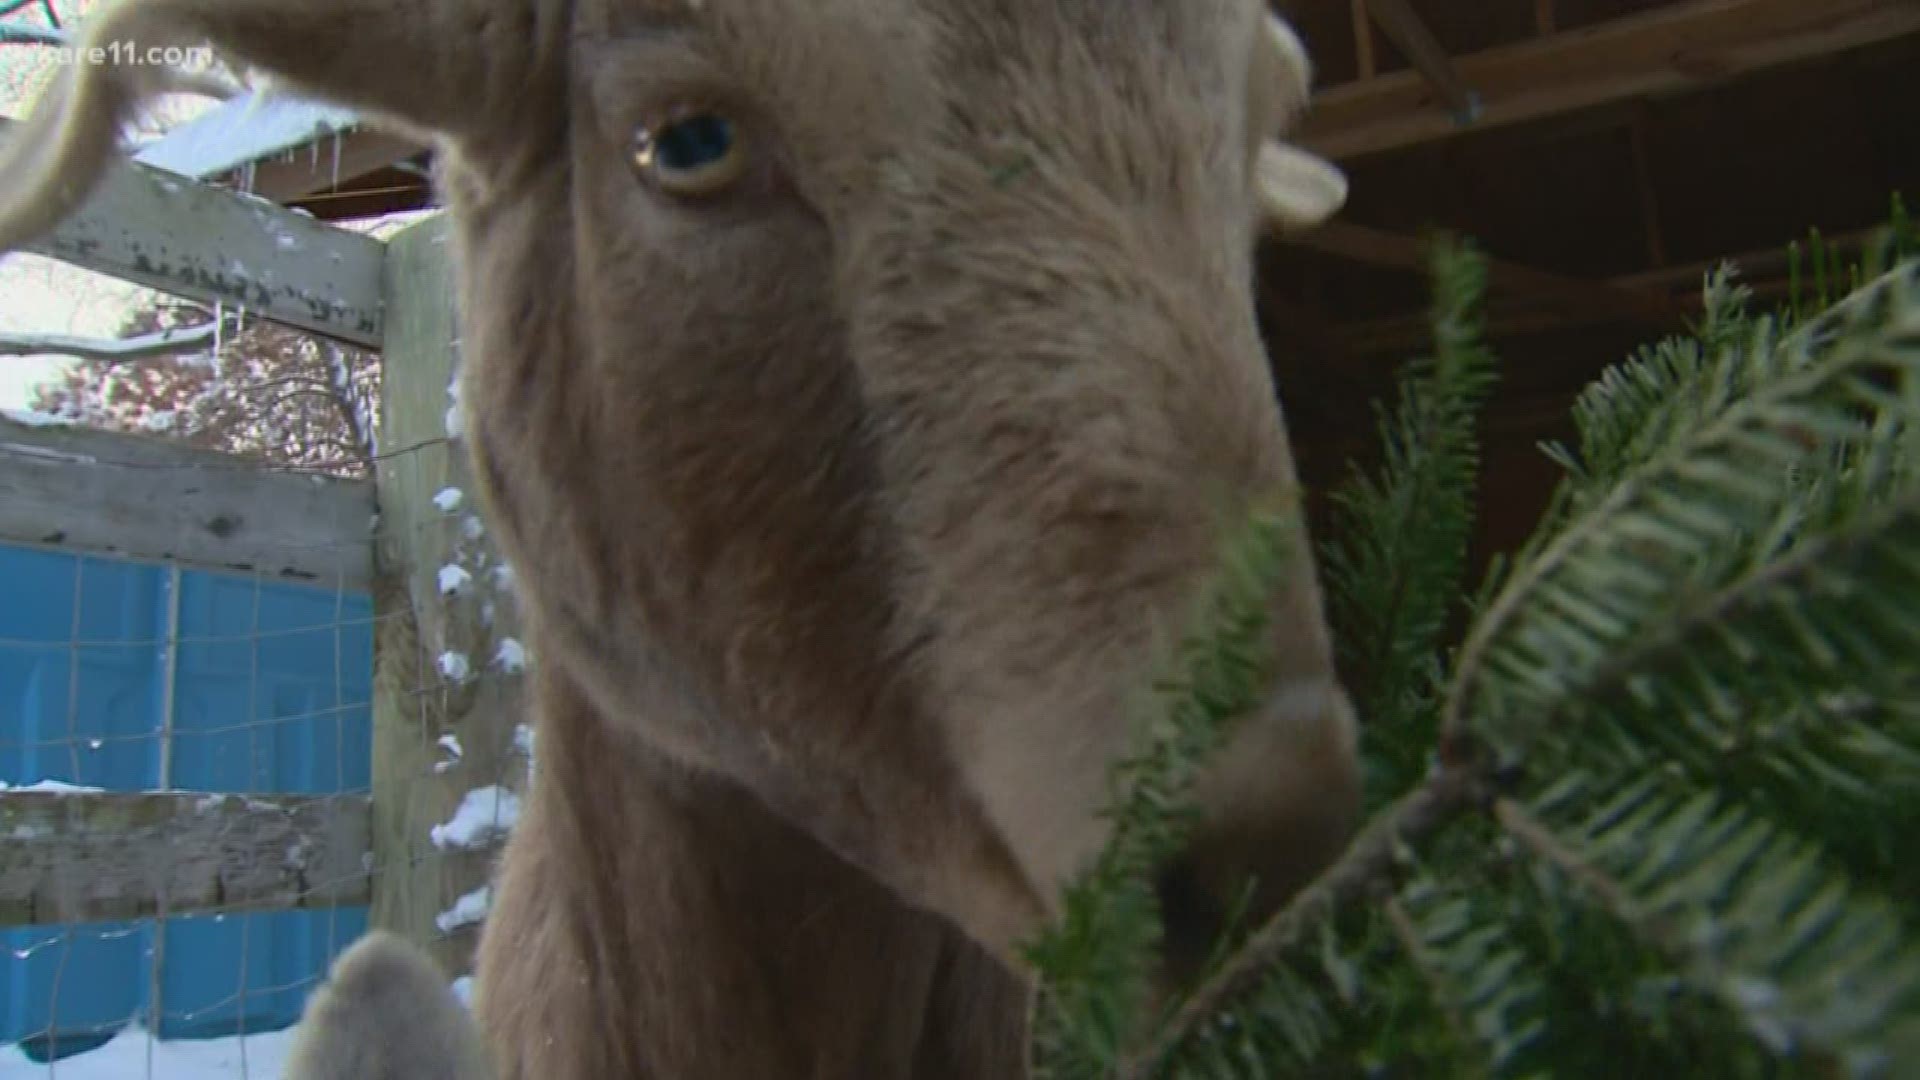 Hillside Hope Through Hooves in Ramsey is accepting Christmas trees if you're looking to recycle yours.